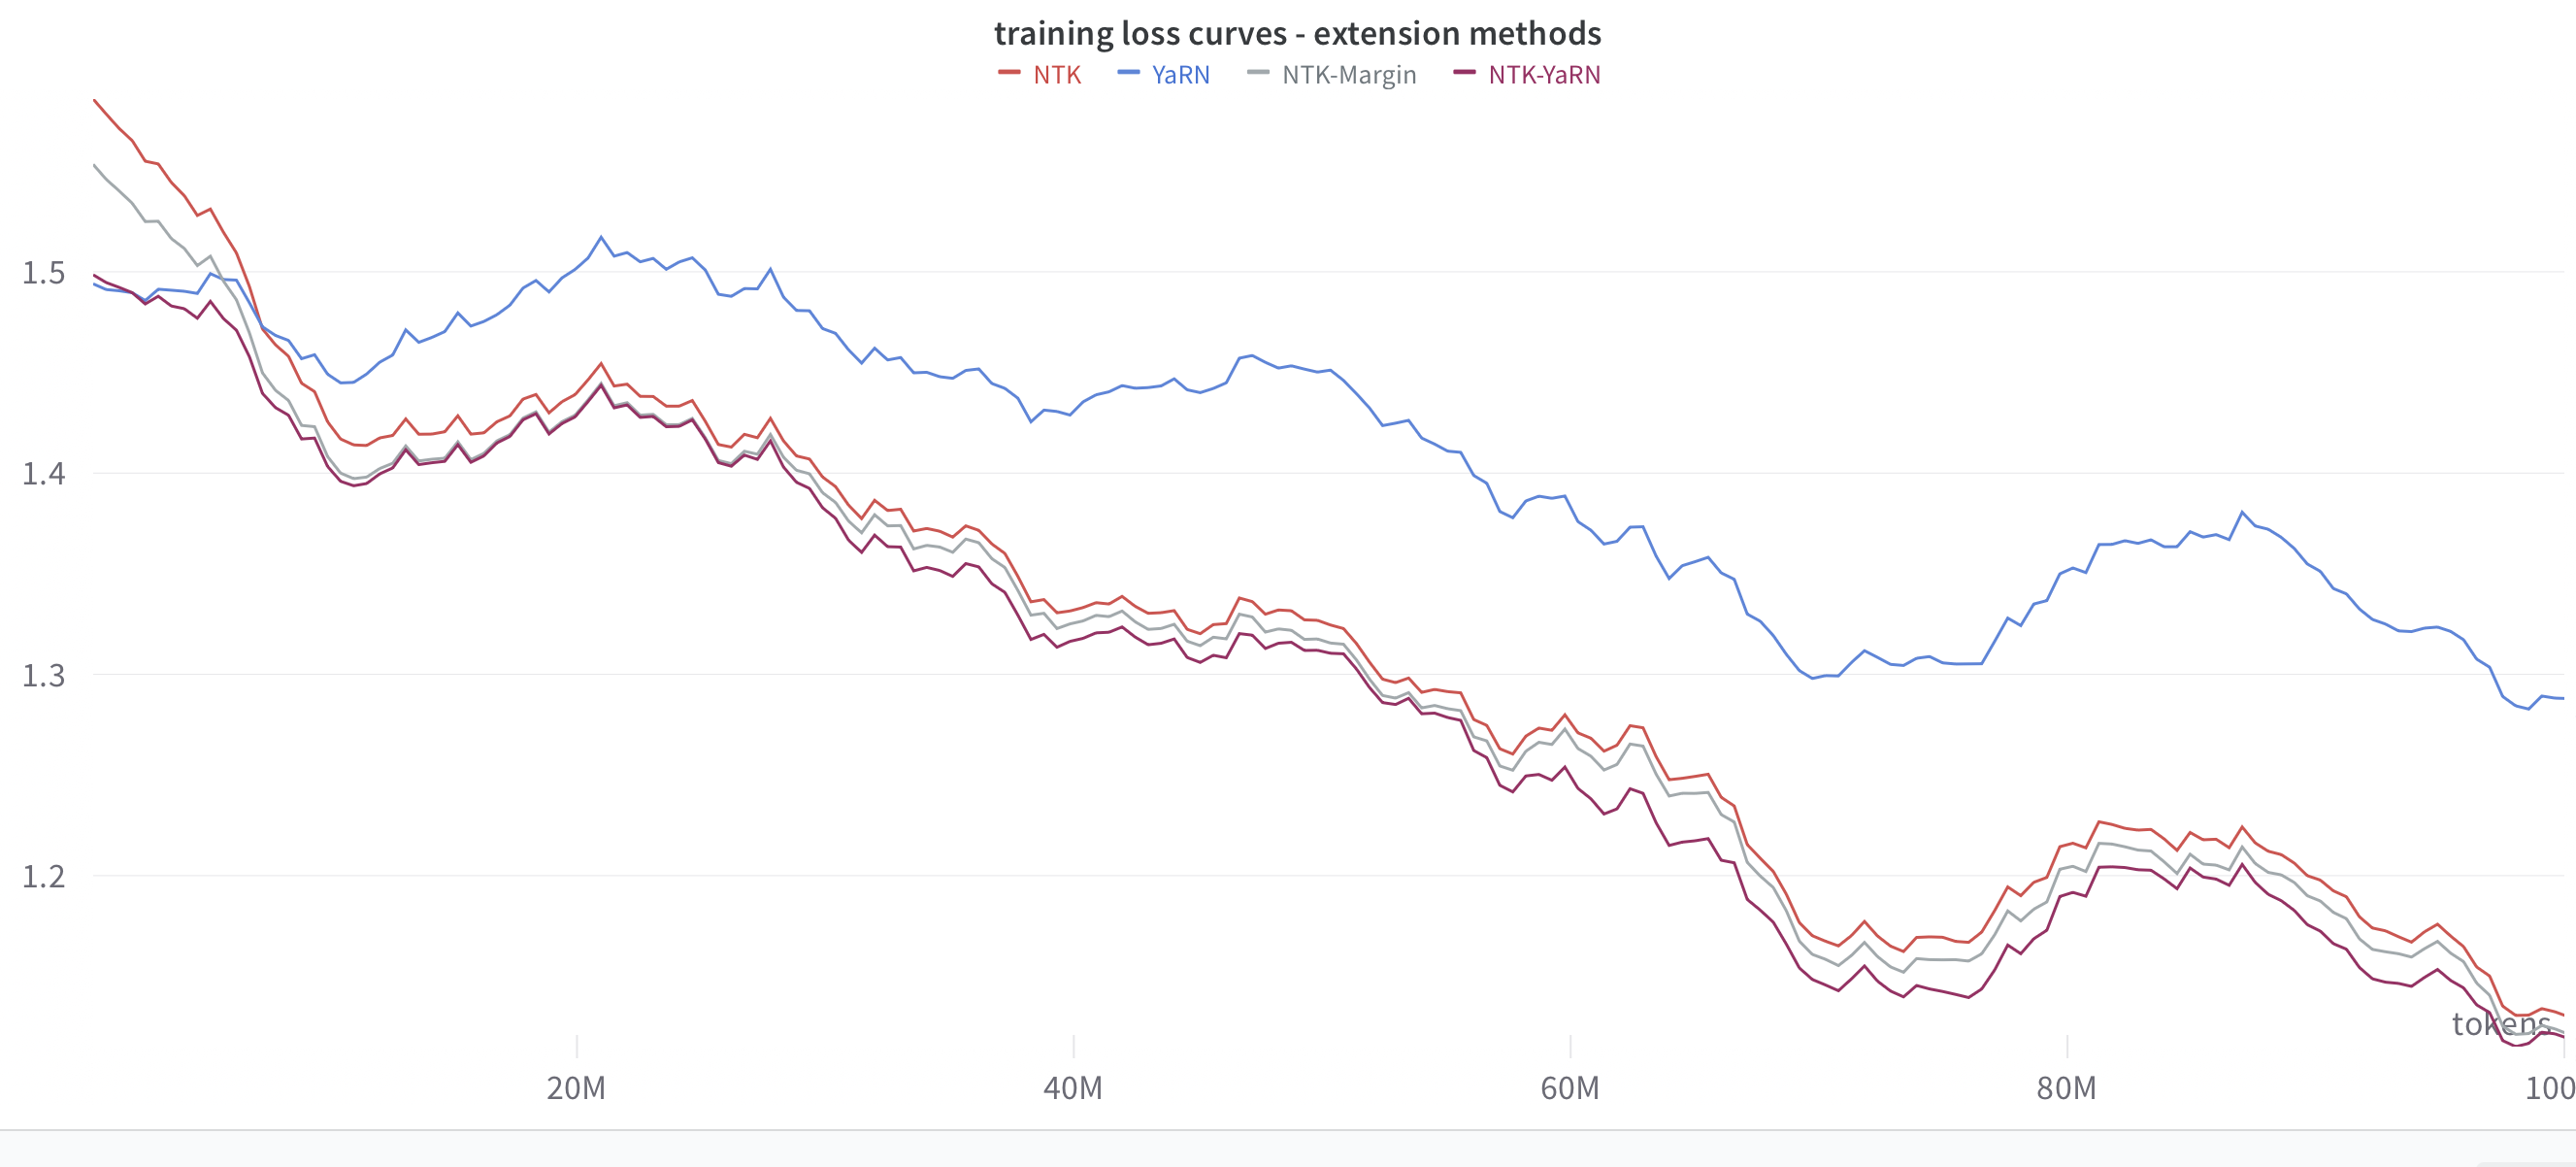 Training loss curves for extension methods